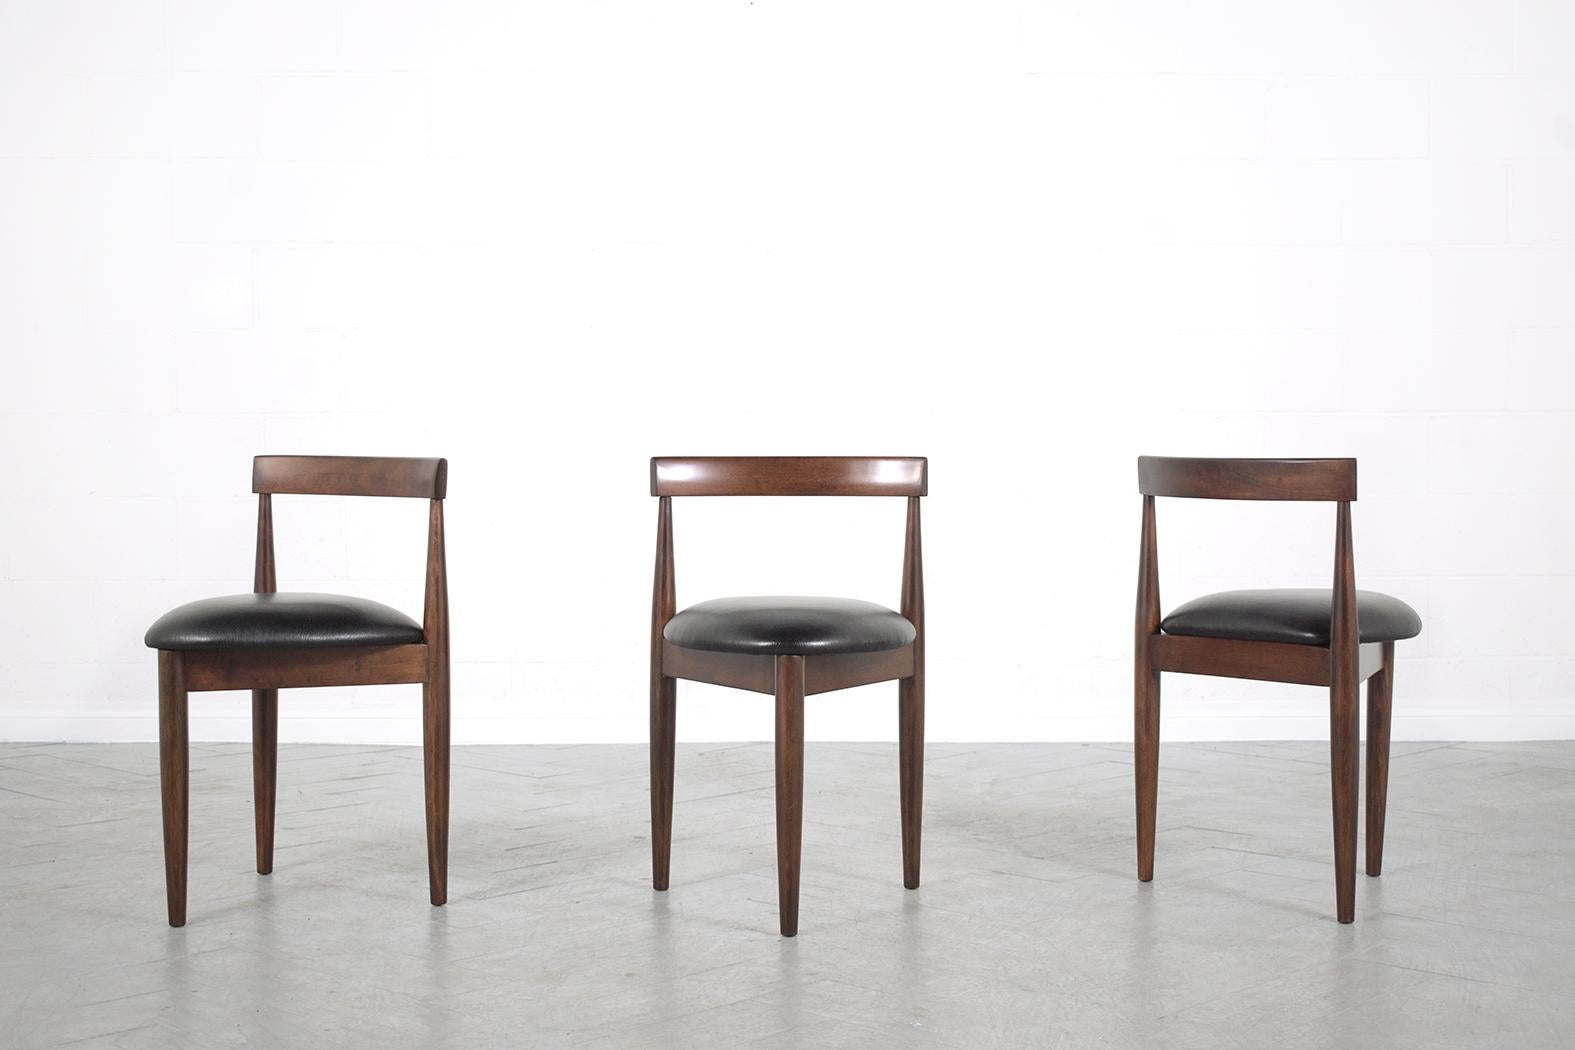 This extraordinary set of three Mid-Century Modern dining chairs in the manner of Hans Olsen executed in walnut wood and have been completely restored, refinished, and upholstered by our professional team of expert craftsmen. This fabulous set